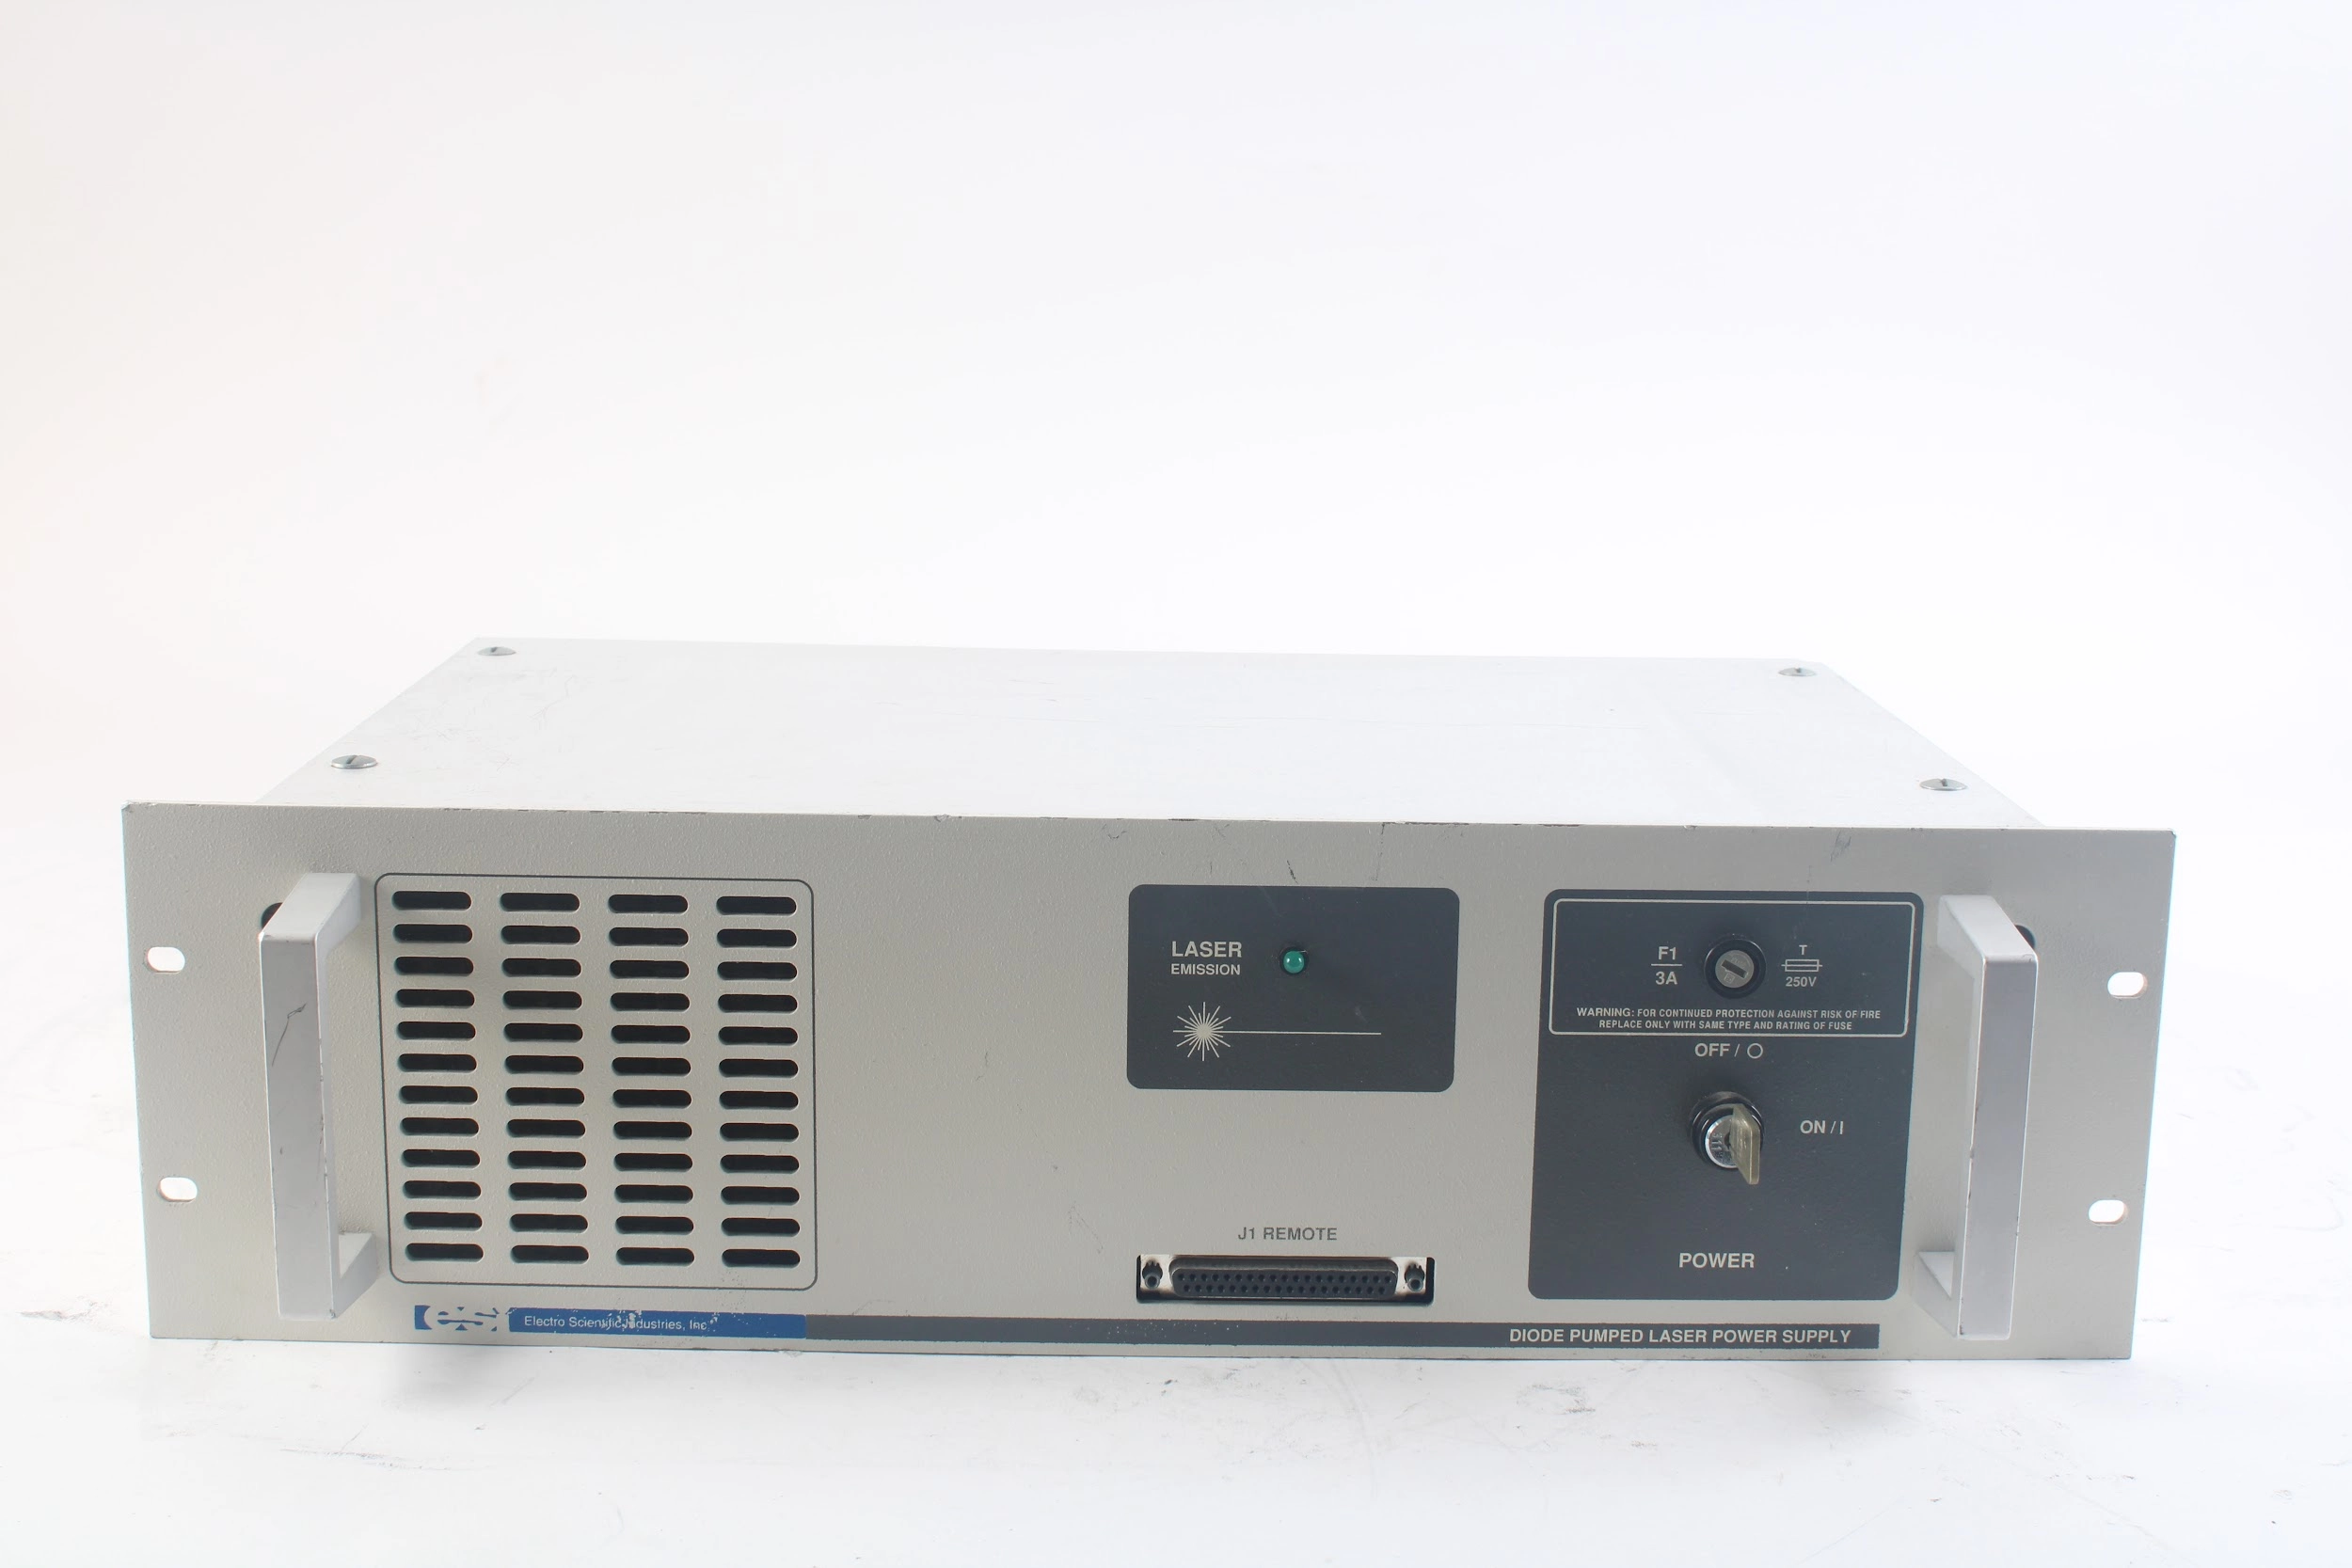 Electro Scientific Diode Pumped Laser Power Supply 7300E-L4-80 With Key